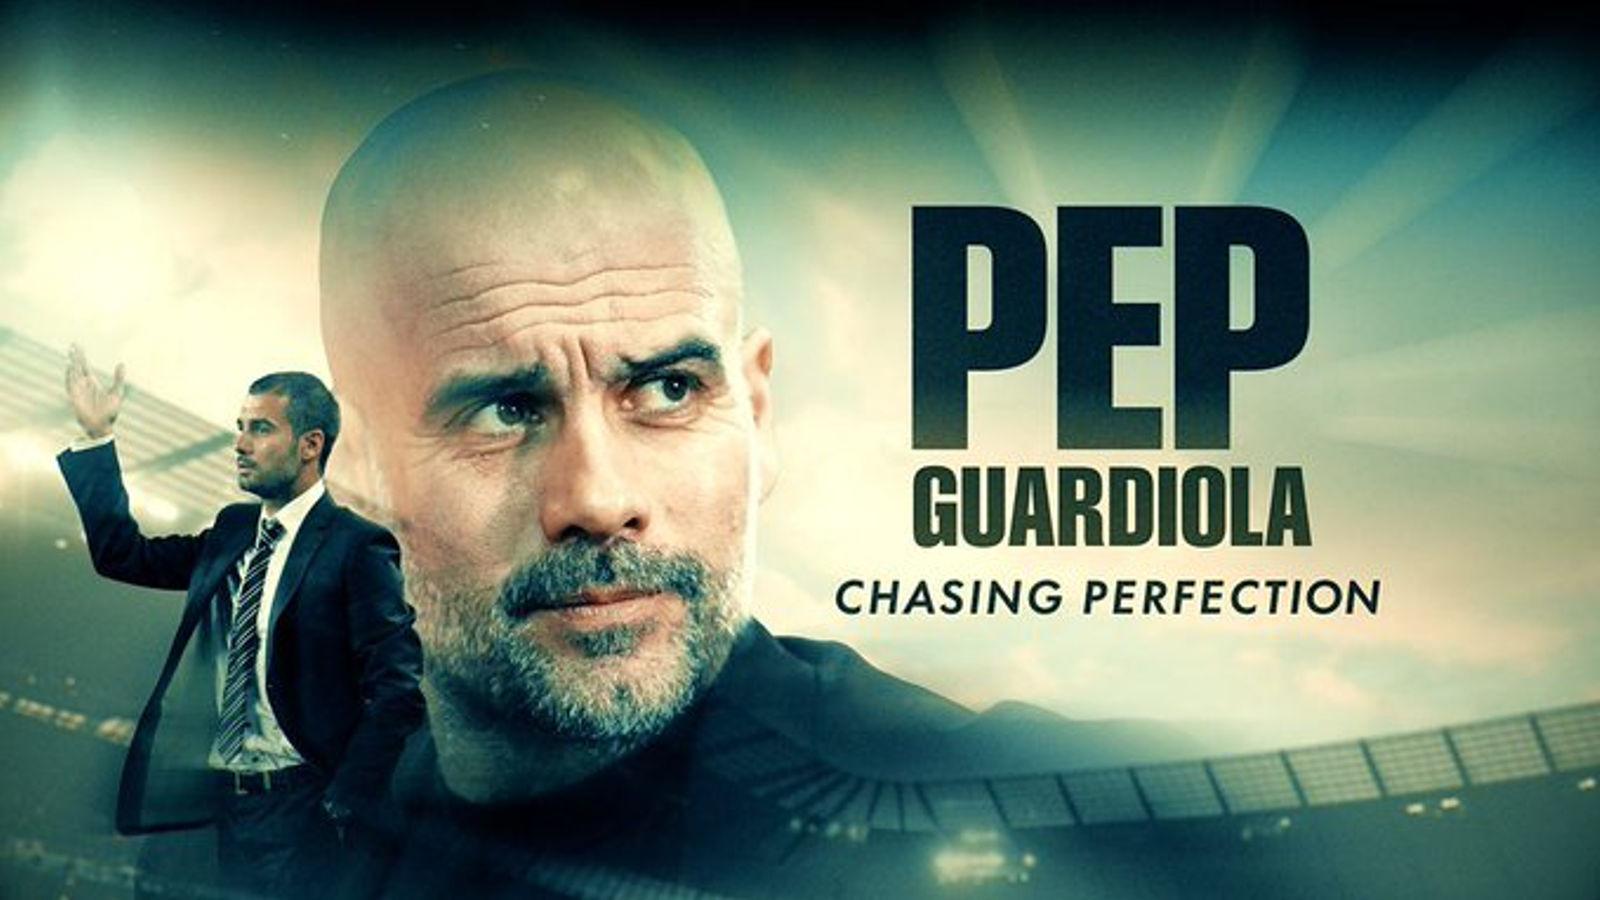 An advert for Pep Guardiola: Chasing Perfection.